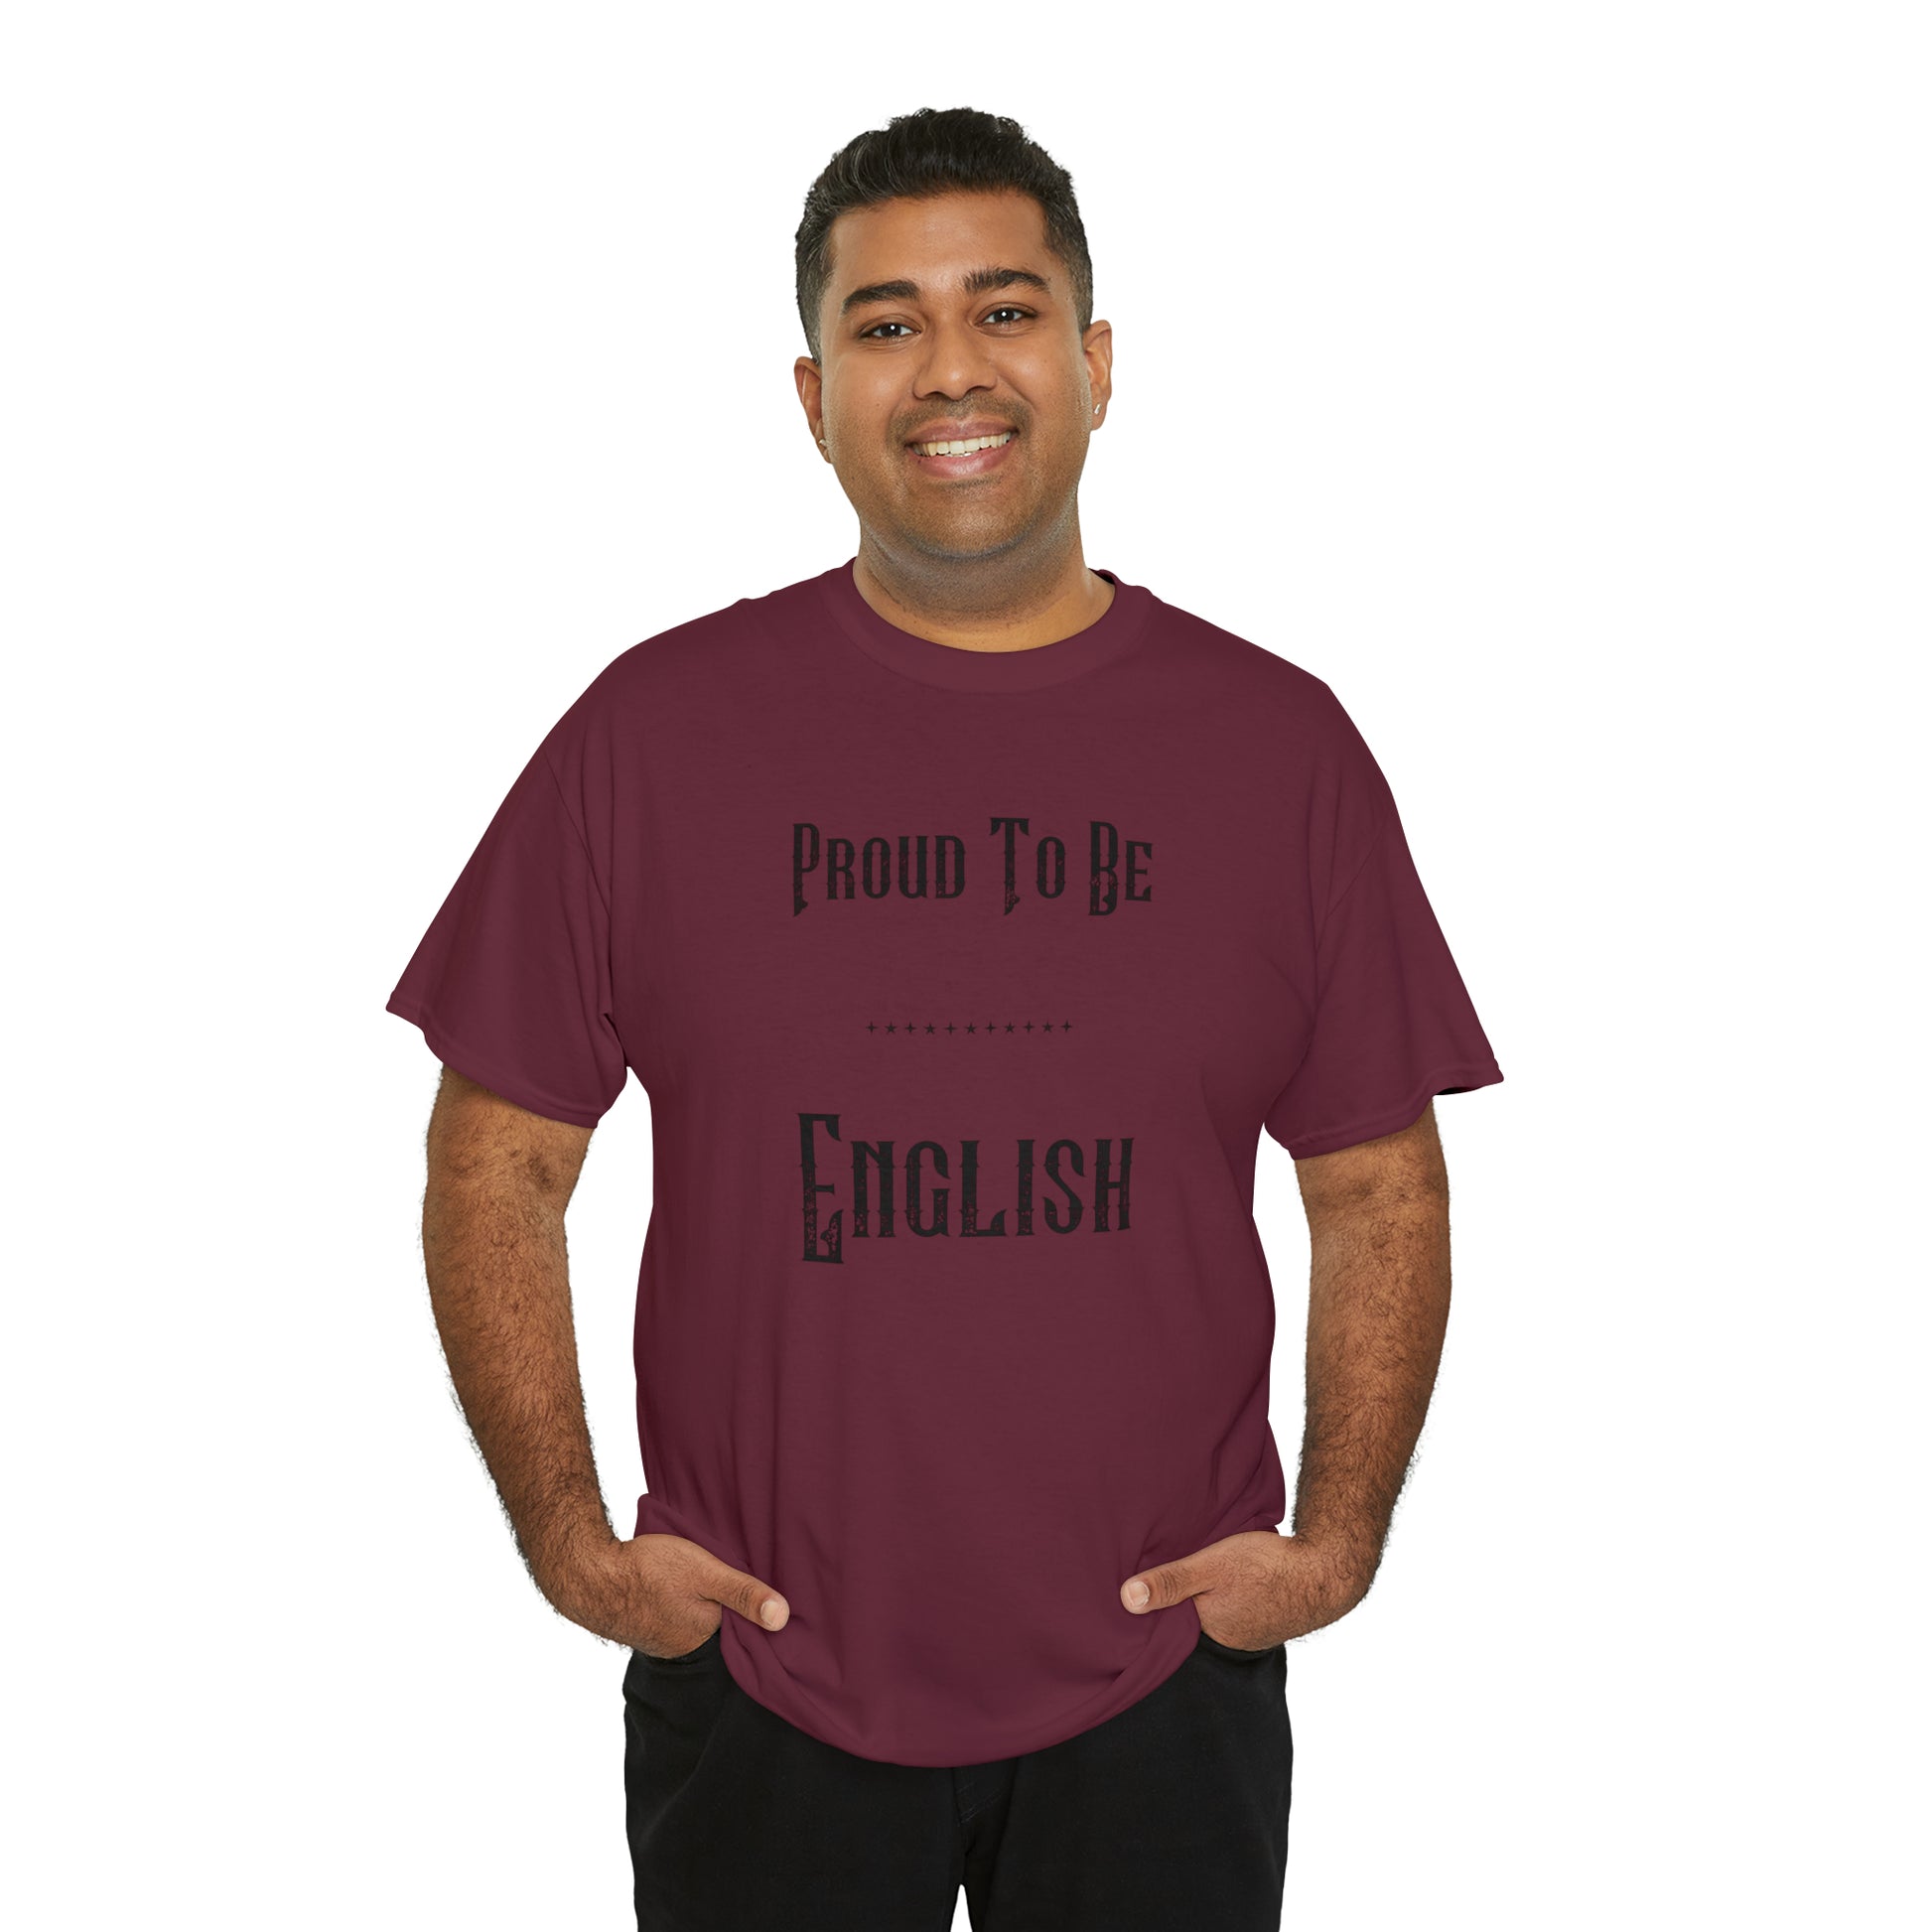 "Proud To Be English" T-Shirt - Weave Got Gifts - Unique Gifts You Won’t Find Anywhere Else!